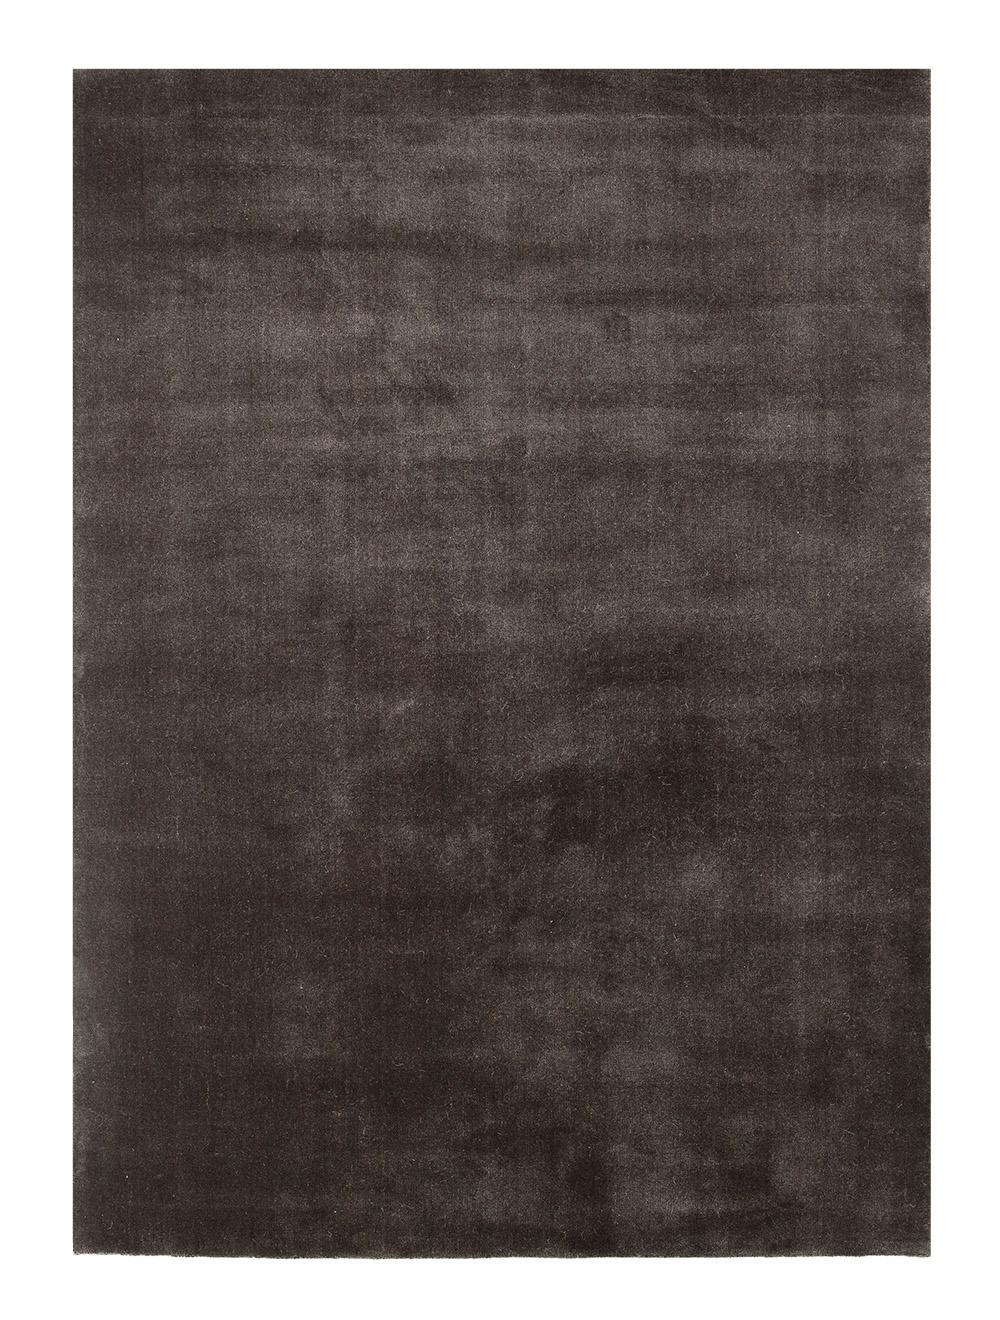 Charcoal earth carpet by Massimo Copenhagen
Handwoven
Materials: 100% New Zealand Wool
Dimensions: W 300 x H 400 cm
Available colors: Verte Grey, Moss Green, Blush, Sea Green, and Charcoal.
Other dimensions are available: 140x200 cm, 170x240